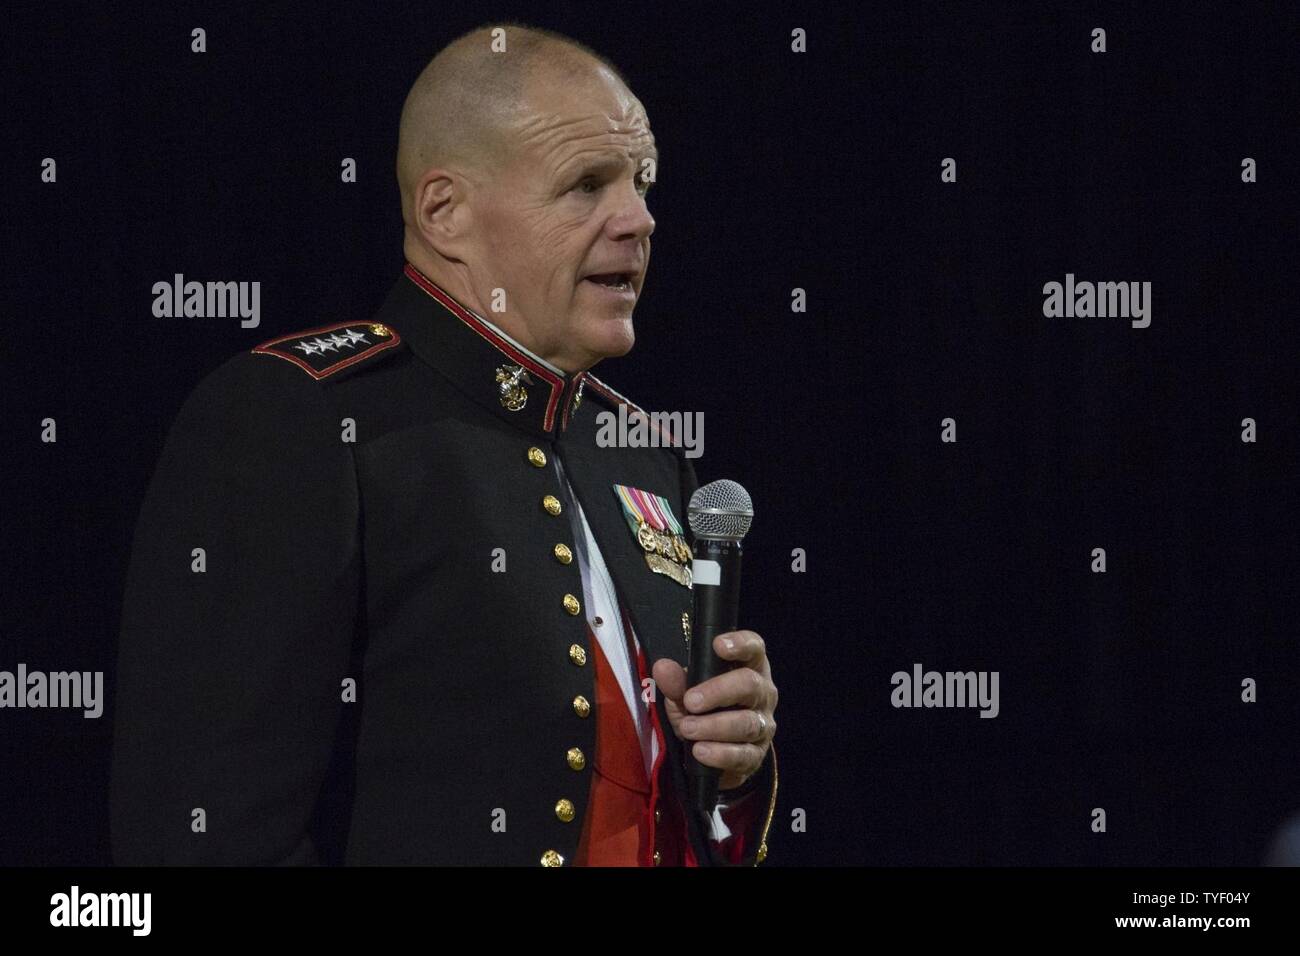 Commandant of the Marine Corps Gen. Robert B. Neller speaks to Marines and guests attending the II Marine Expeditionary Force Marine Corps Birthday Ball at Marine Corps Base Camp Lejeune, N.C., Nov. 5, 2016. Neller attended the birthday ball as the guest of honor. Stock Photo